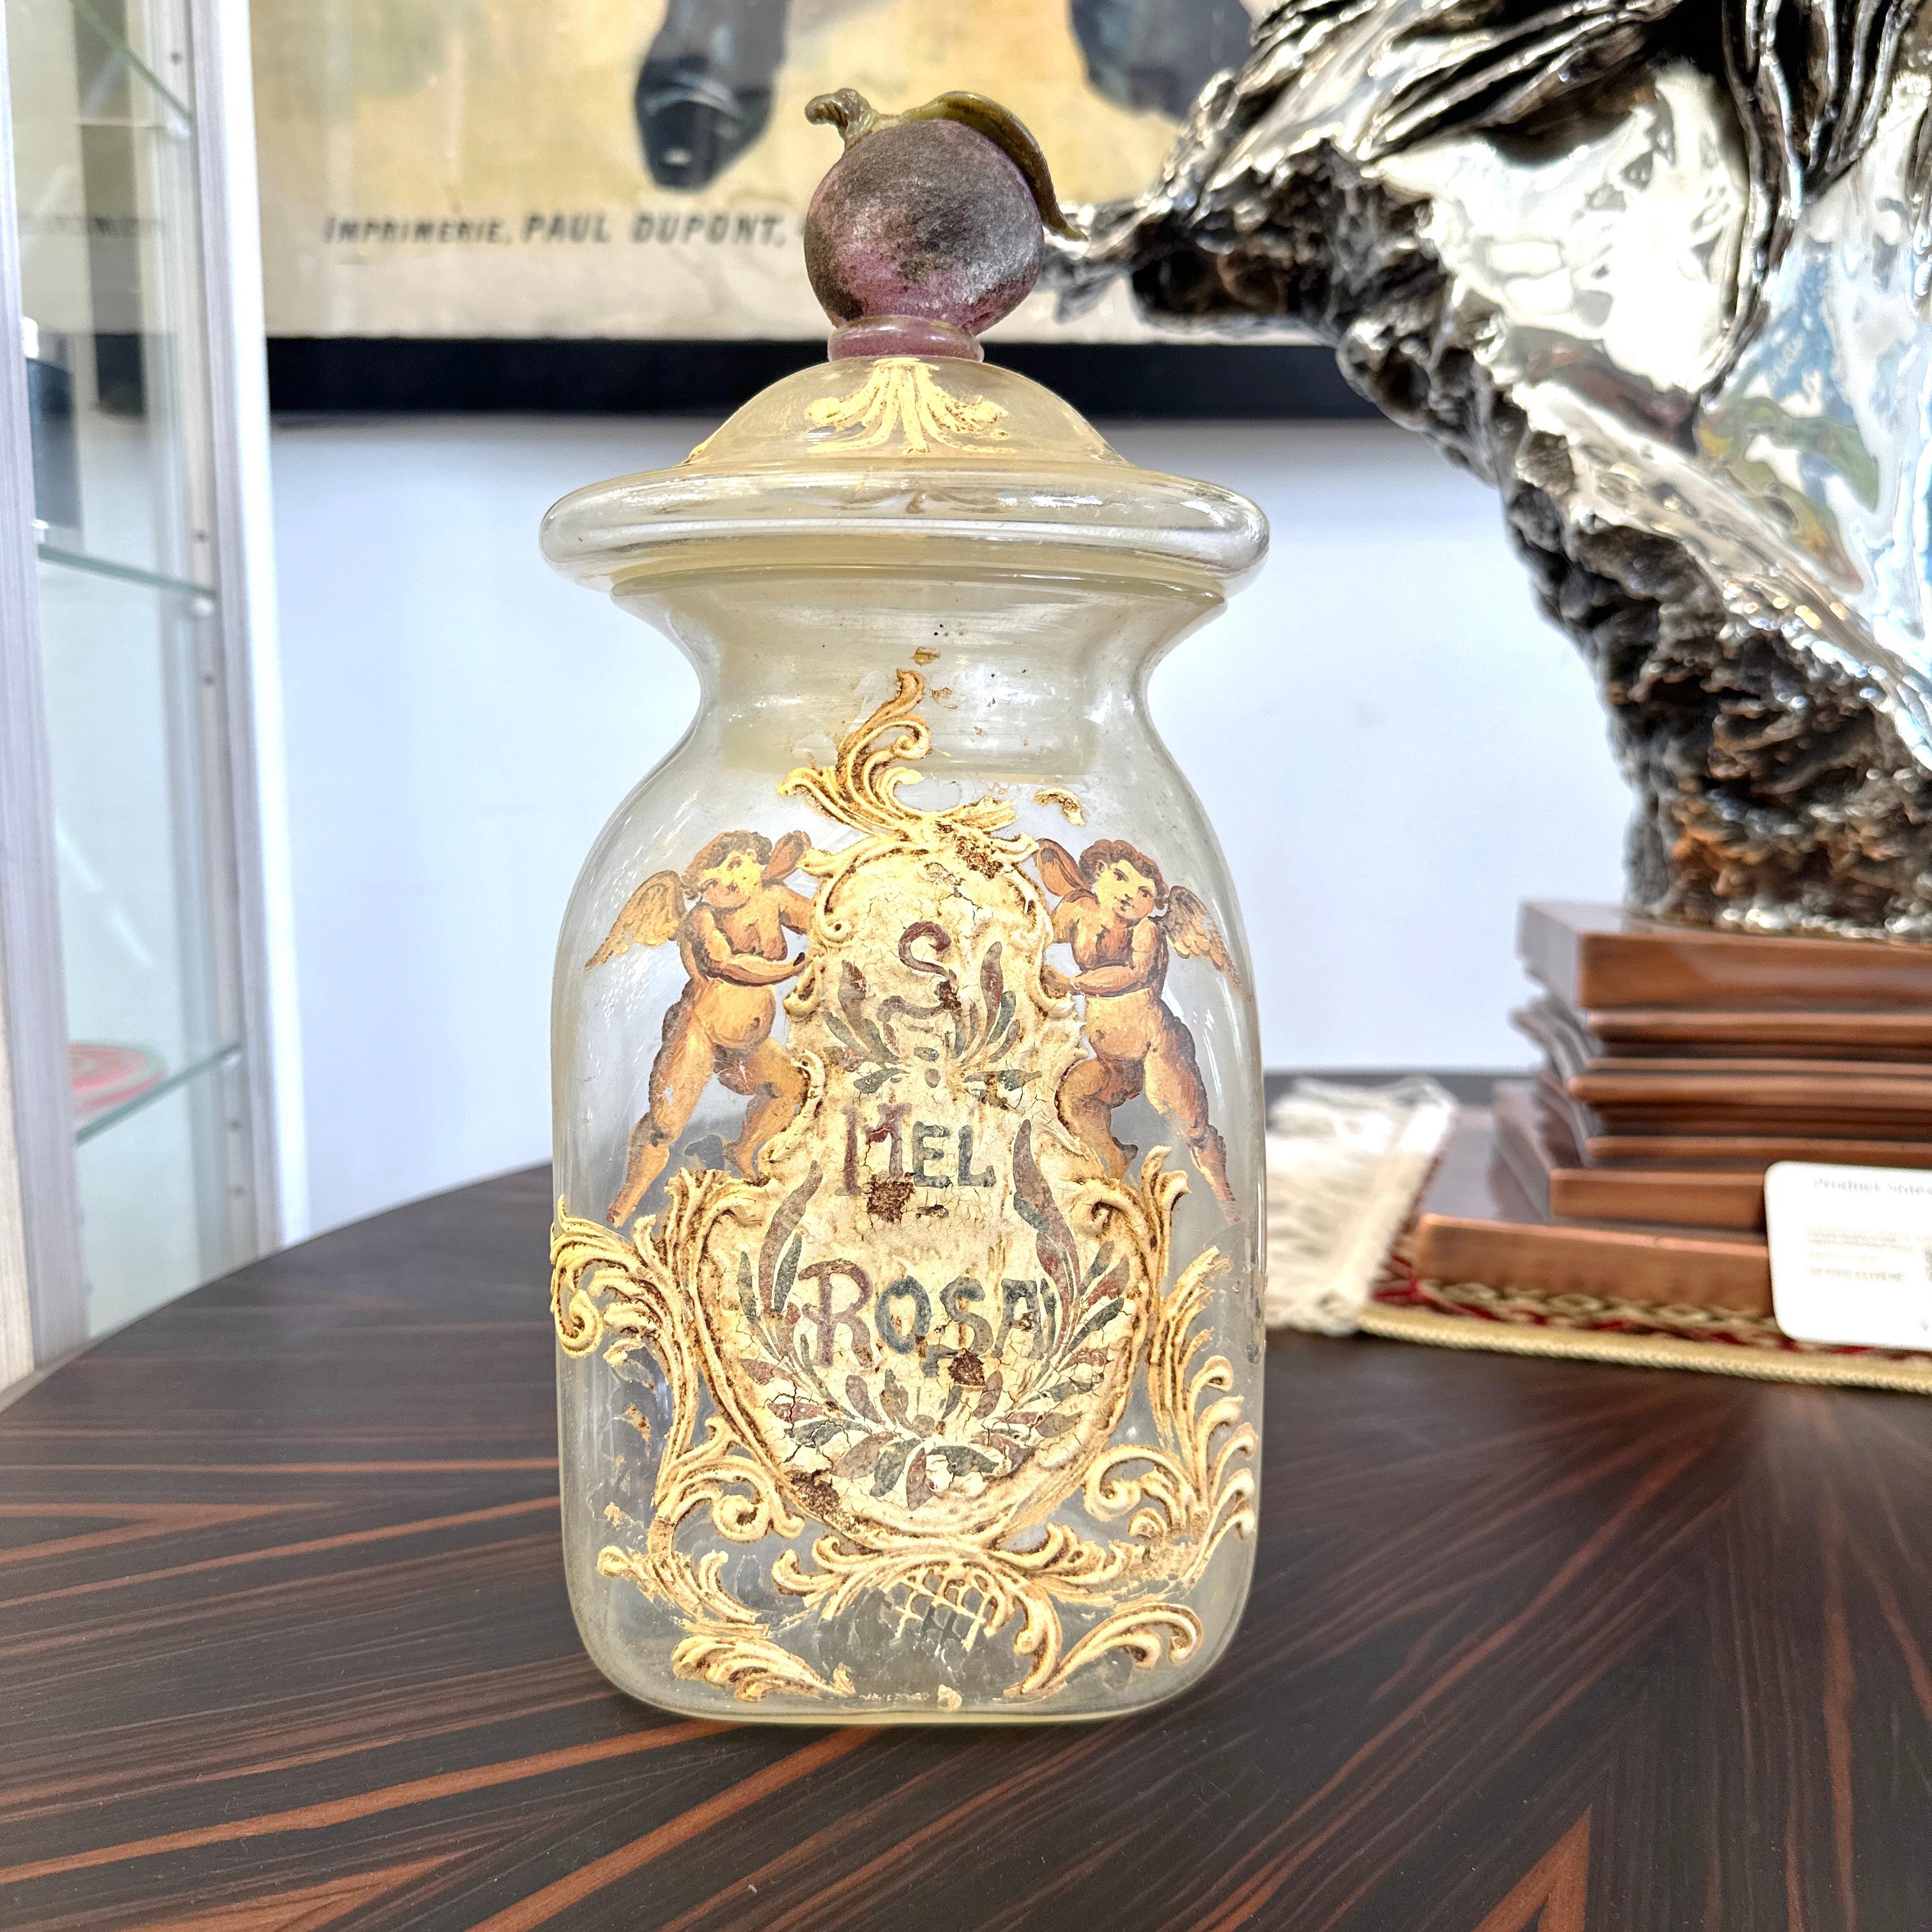 Here is a beautiful, rare and large Antique Italian Murano Glass Pharmacy Apothecary Jar. Elaborately hand painted and gilt on a clear Murano glass. Featuring an apple with leaf on the lid. Reads S. MEL ROSA in Latin which translates to Honey Rose.